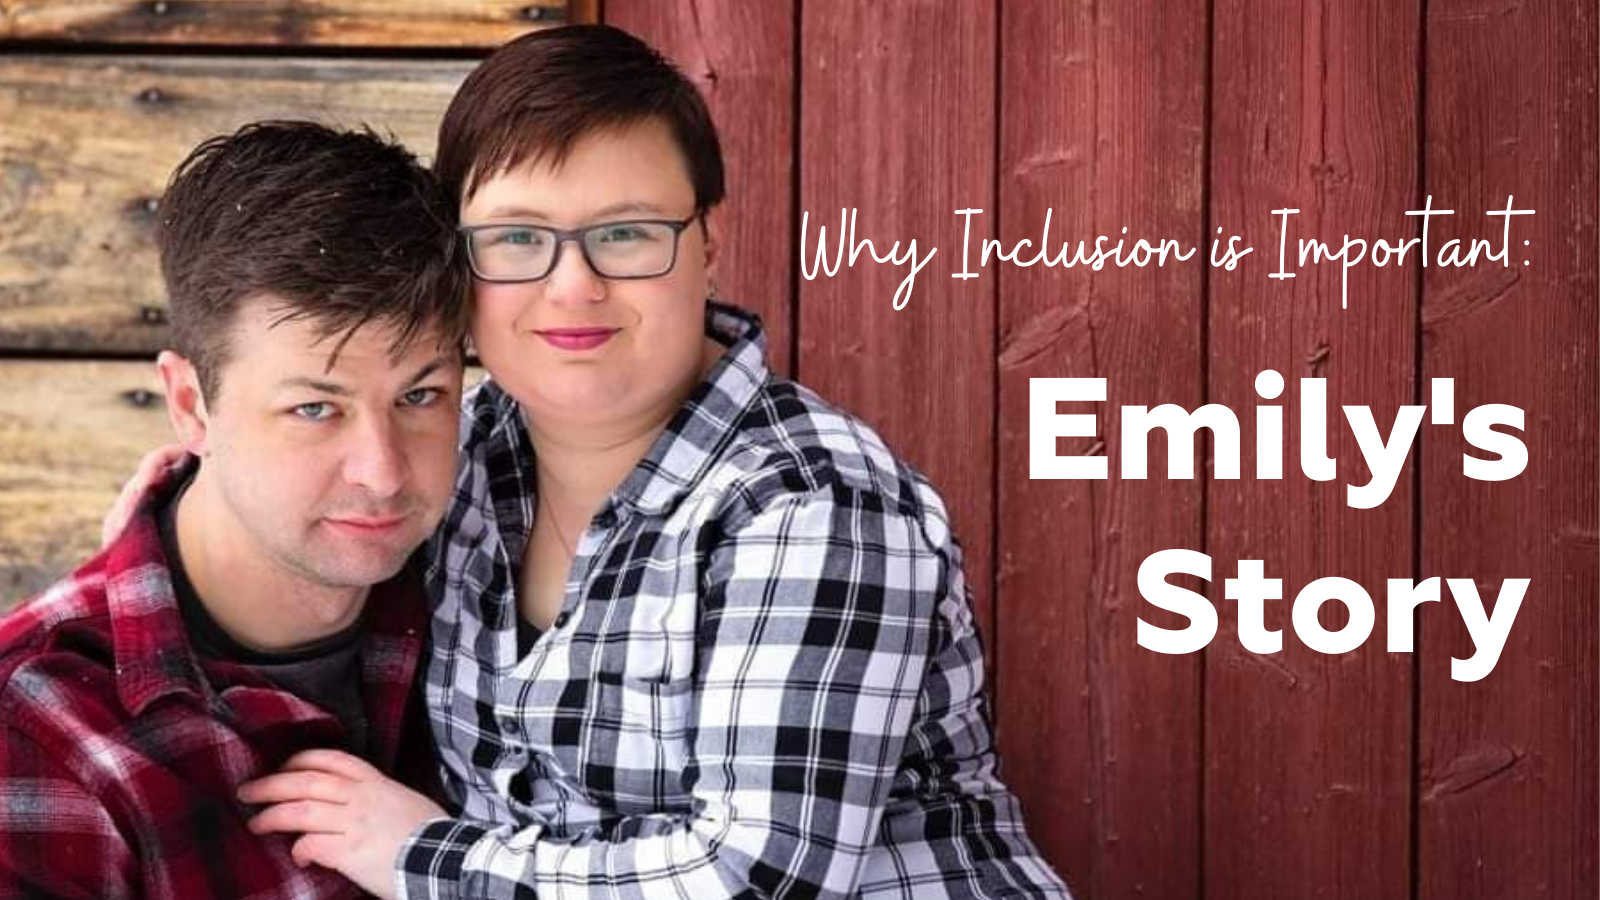 Emily and Braden pose in front of a wooden wall. Both are wearing plaid shirts (Braden red and black, Emily blue and white). Both have shorter brown hair. Emily is wearing glasses. "Why Inclusion is Important: Emily's Story"